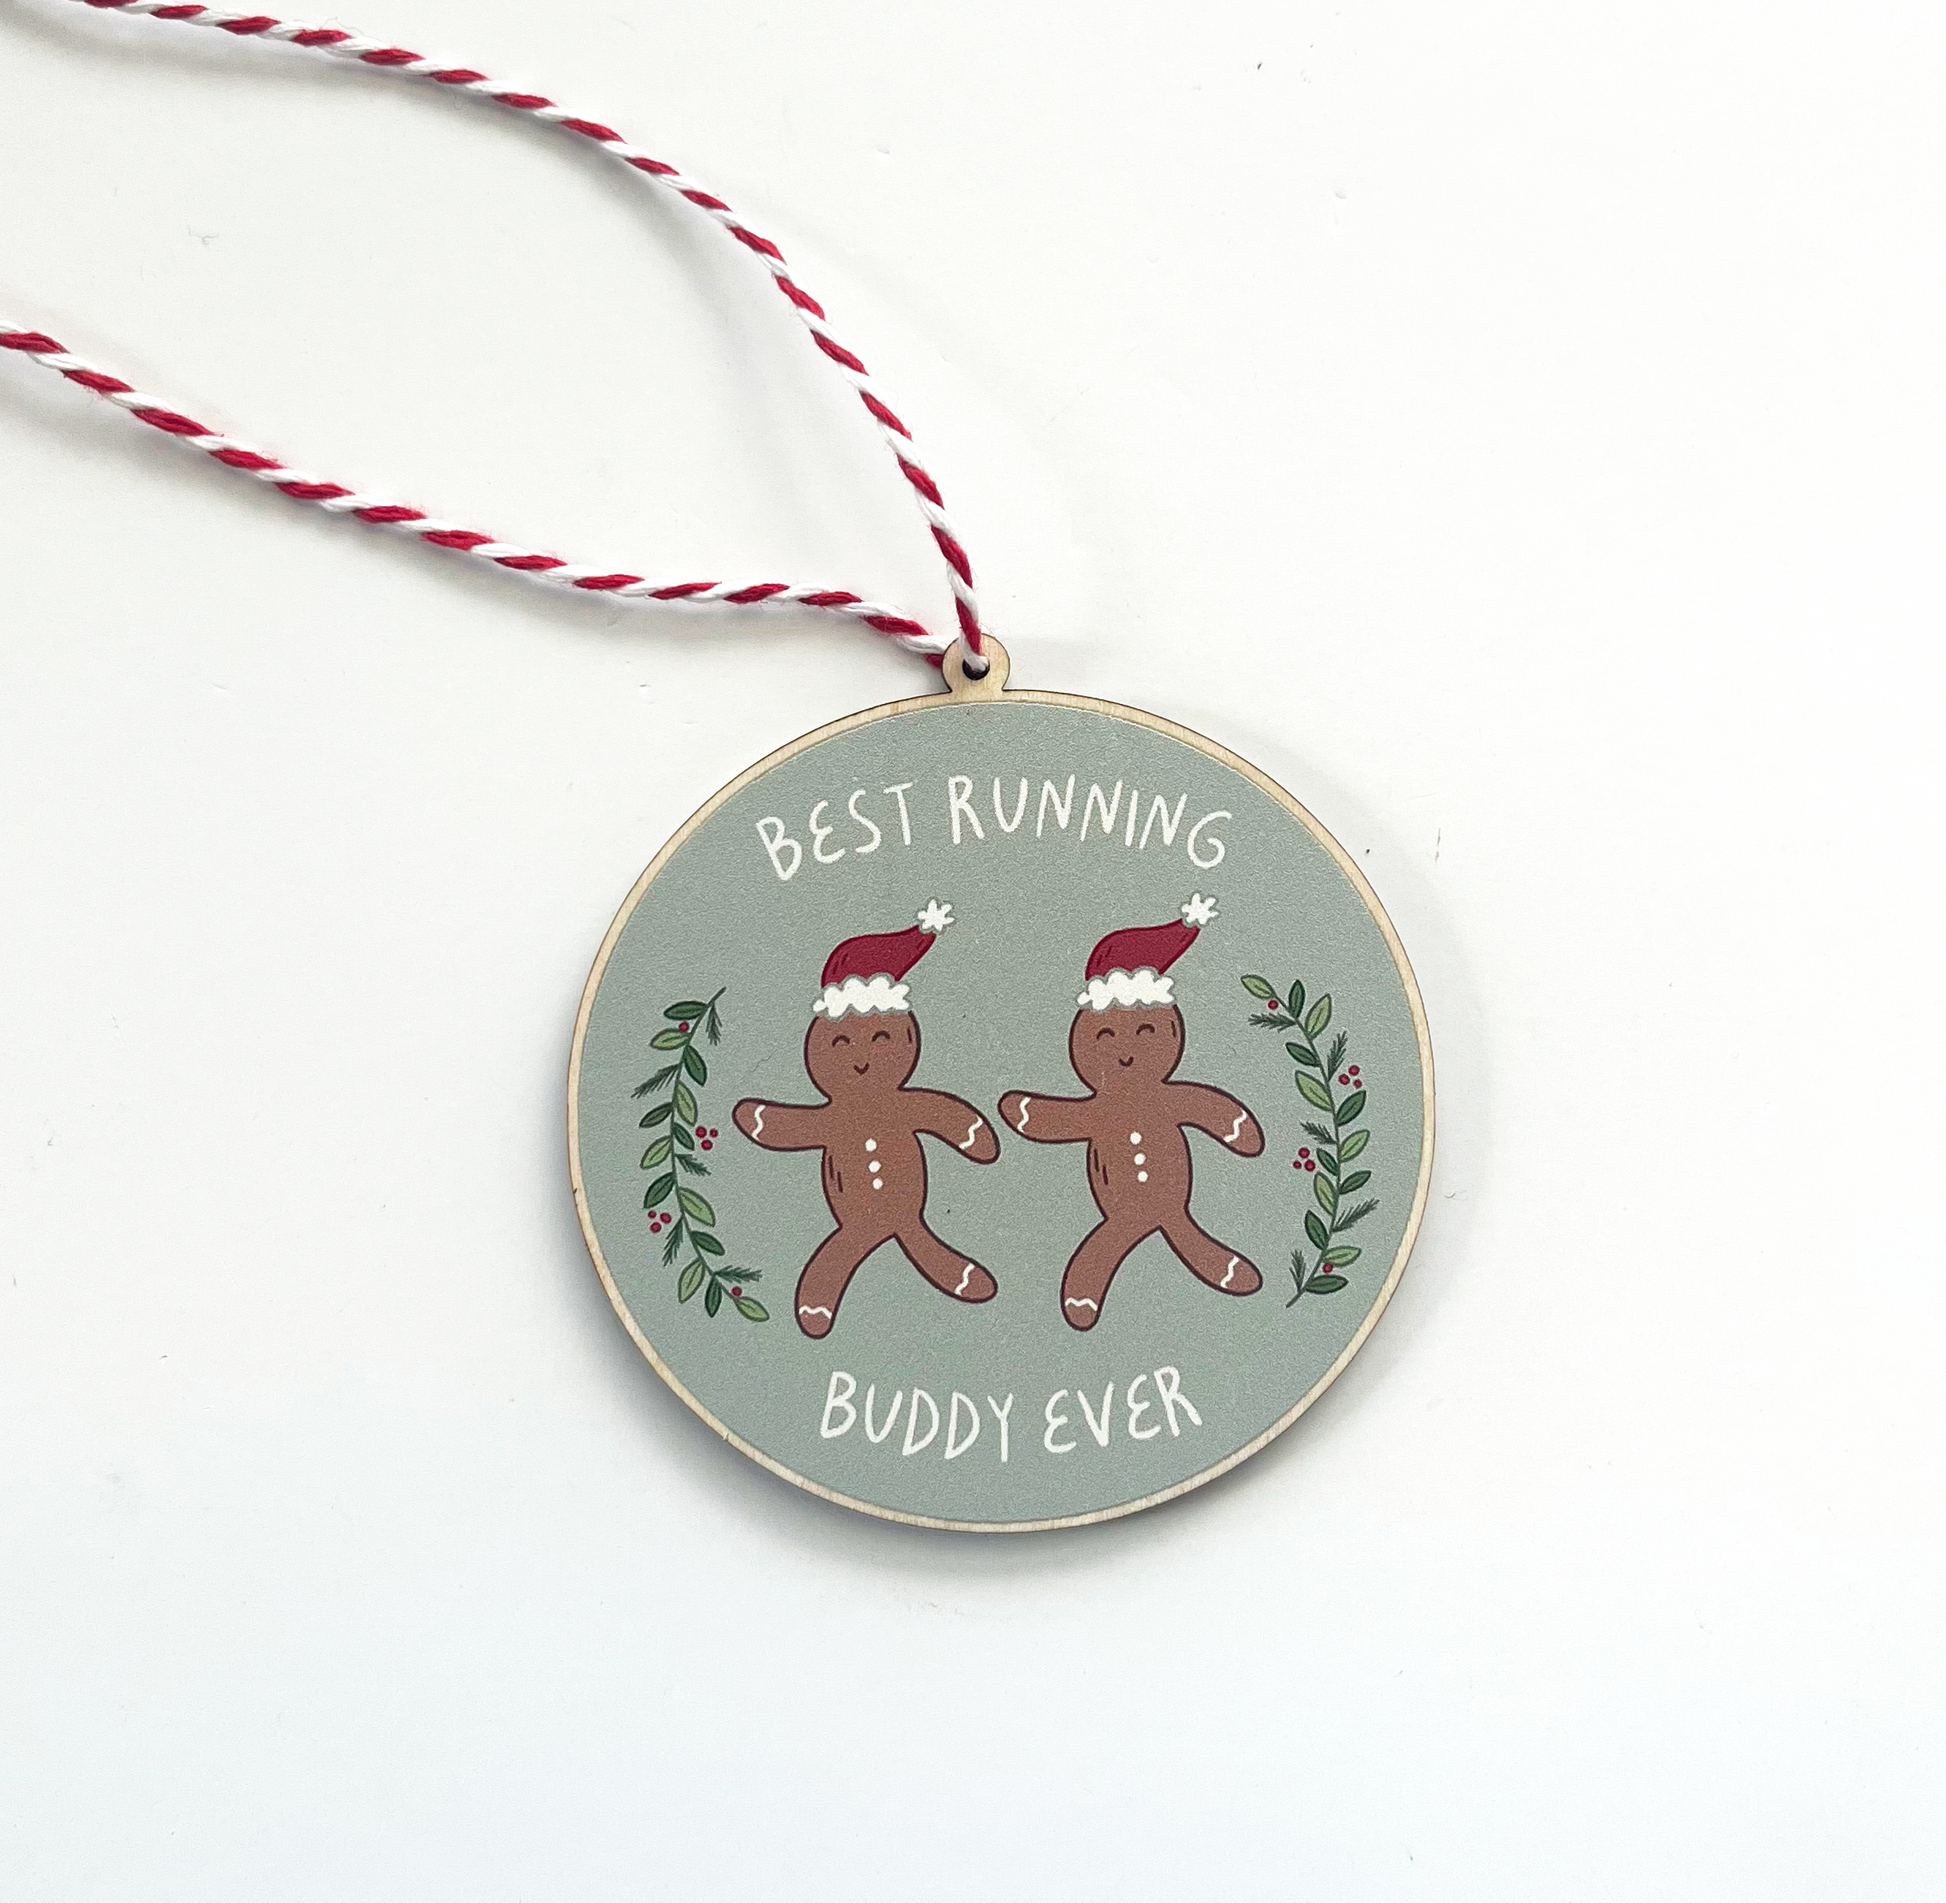 Circular ornament with two running gingerbread people with santa hats, surrounded with greenery on either side and the text best running buddy ever